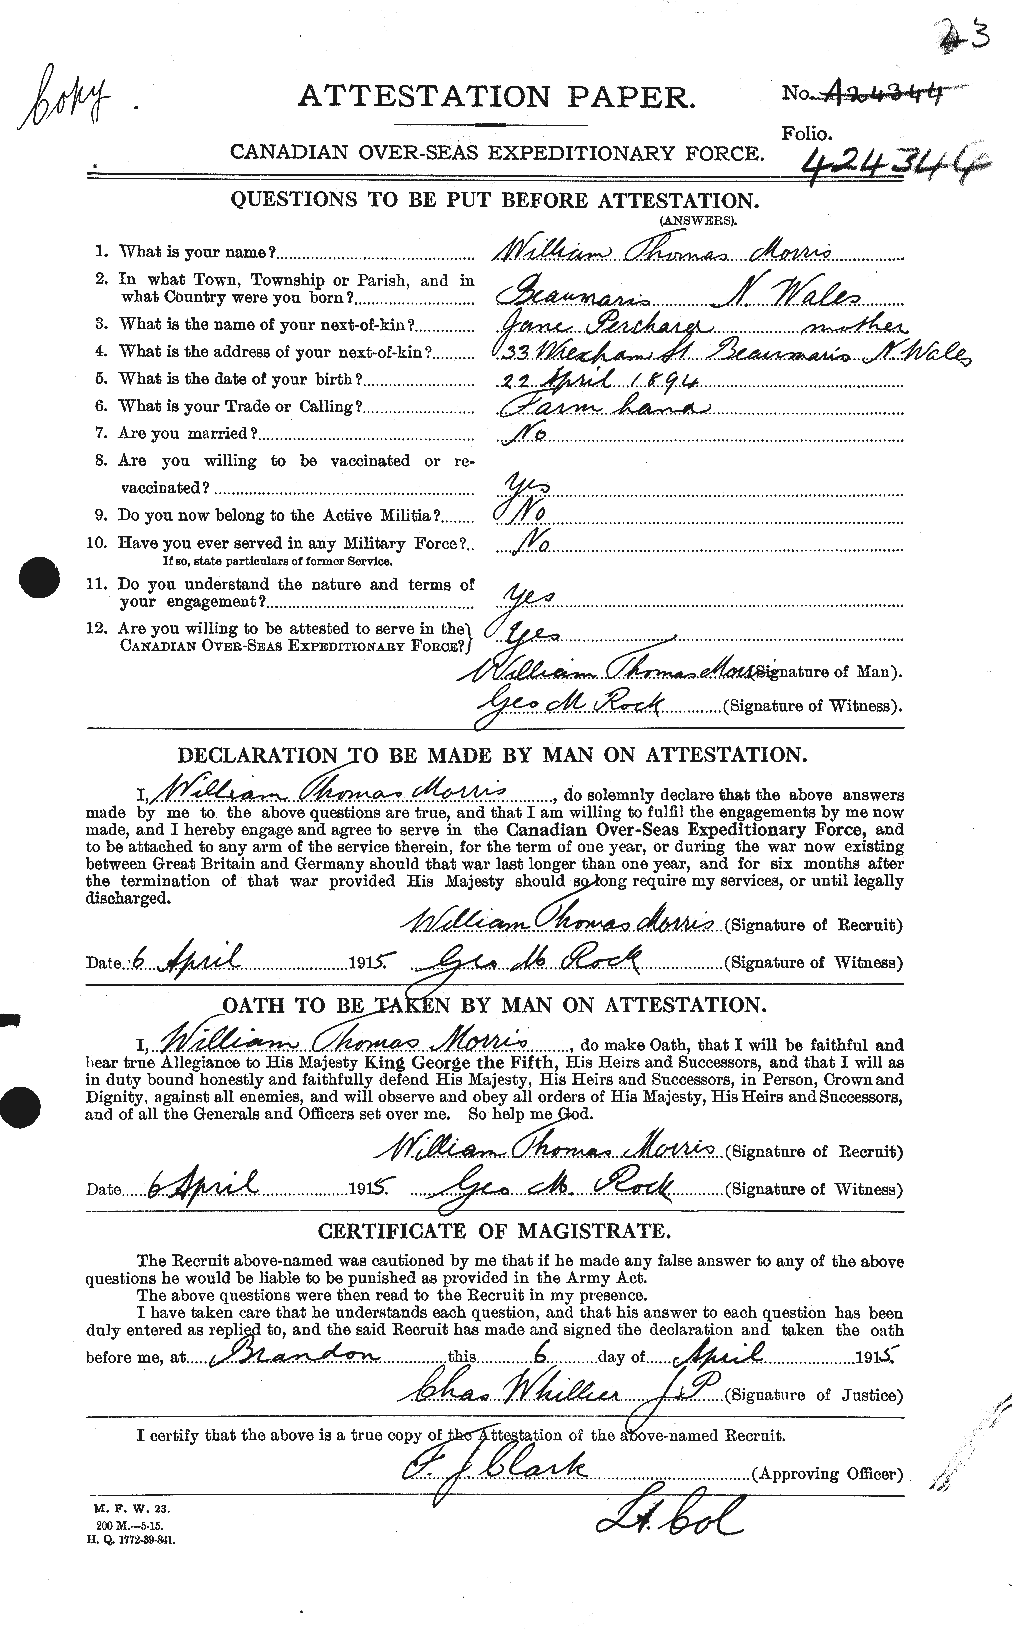 Personnel Records of the First World War - CEF 508835a